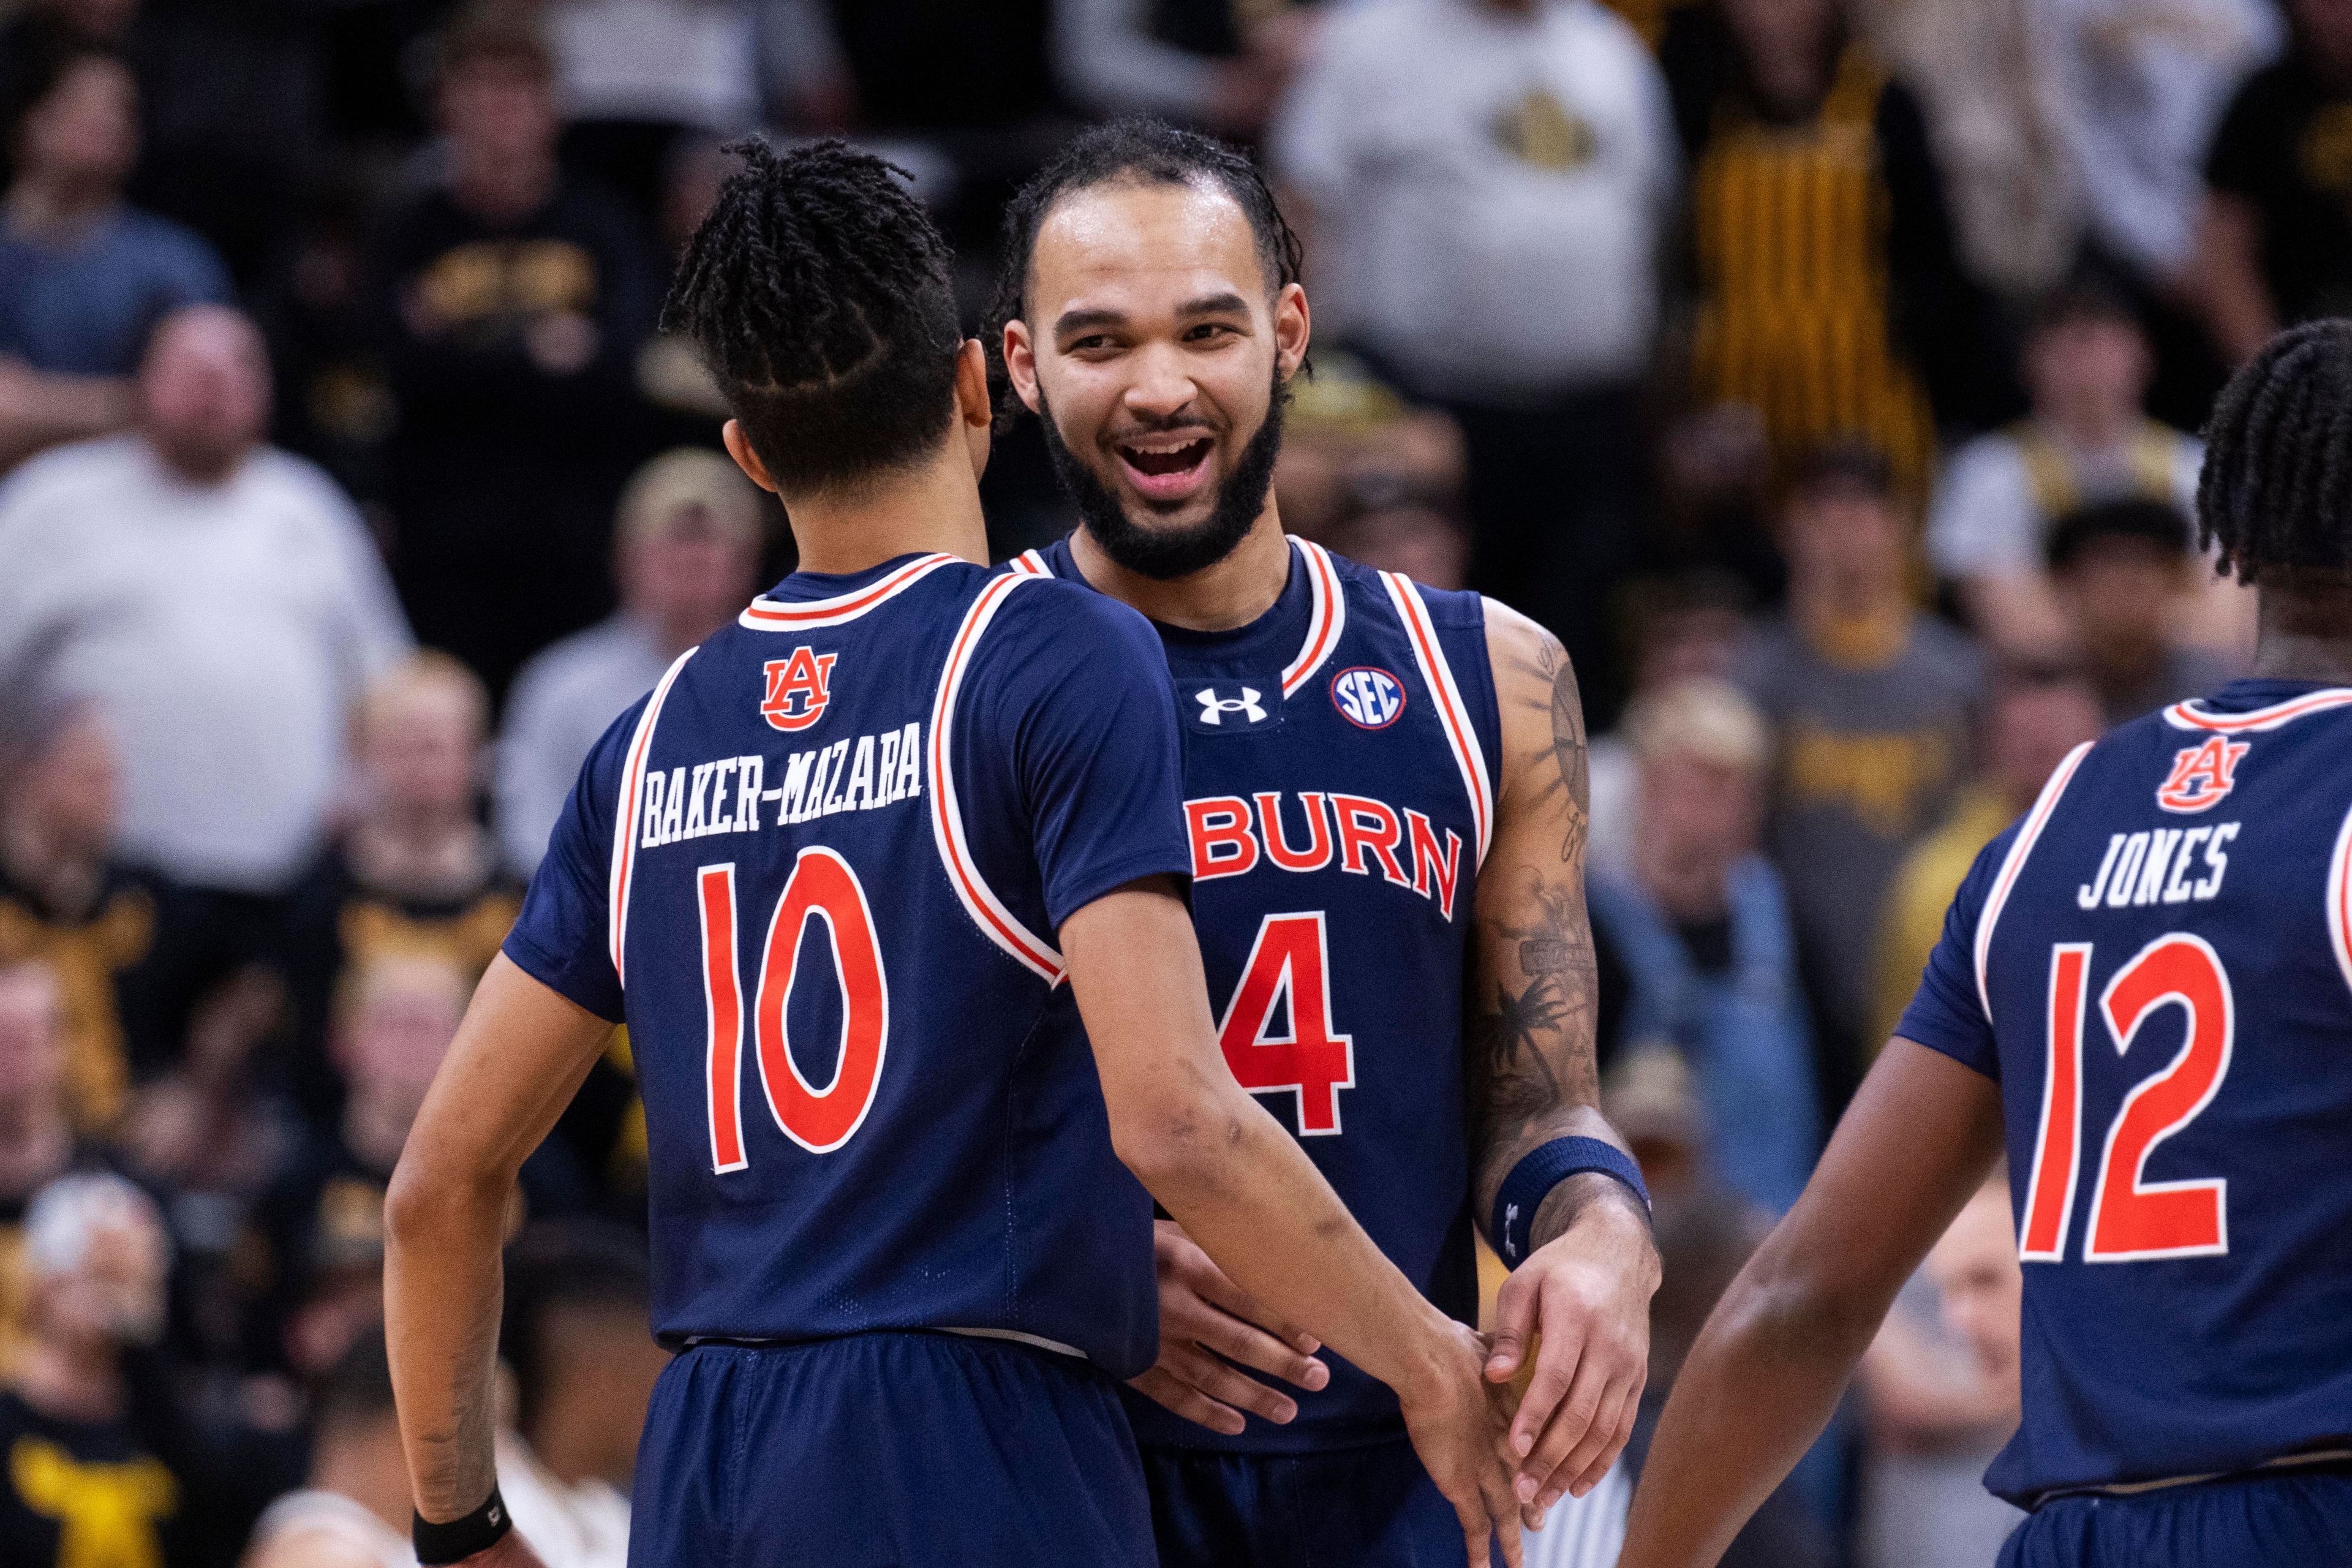 Williams scores 17 to help No. 13 Auburn beat Missouri 101-74, dropping Tigers to 0-17 in SEC